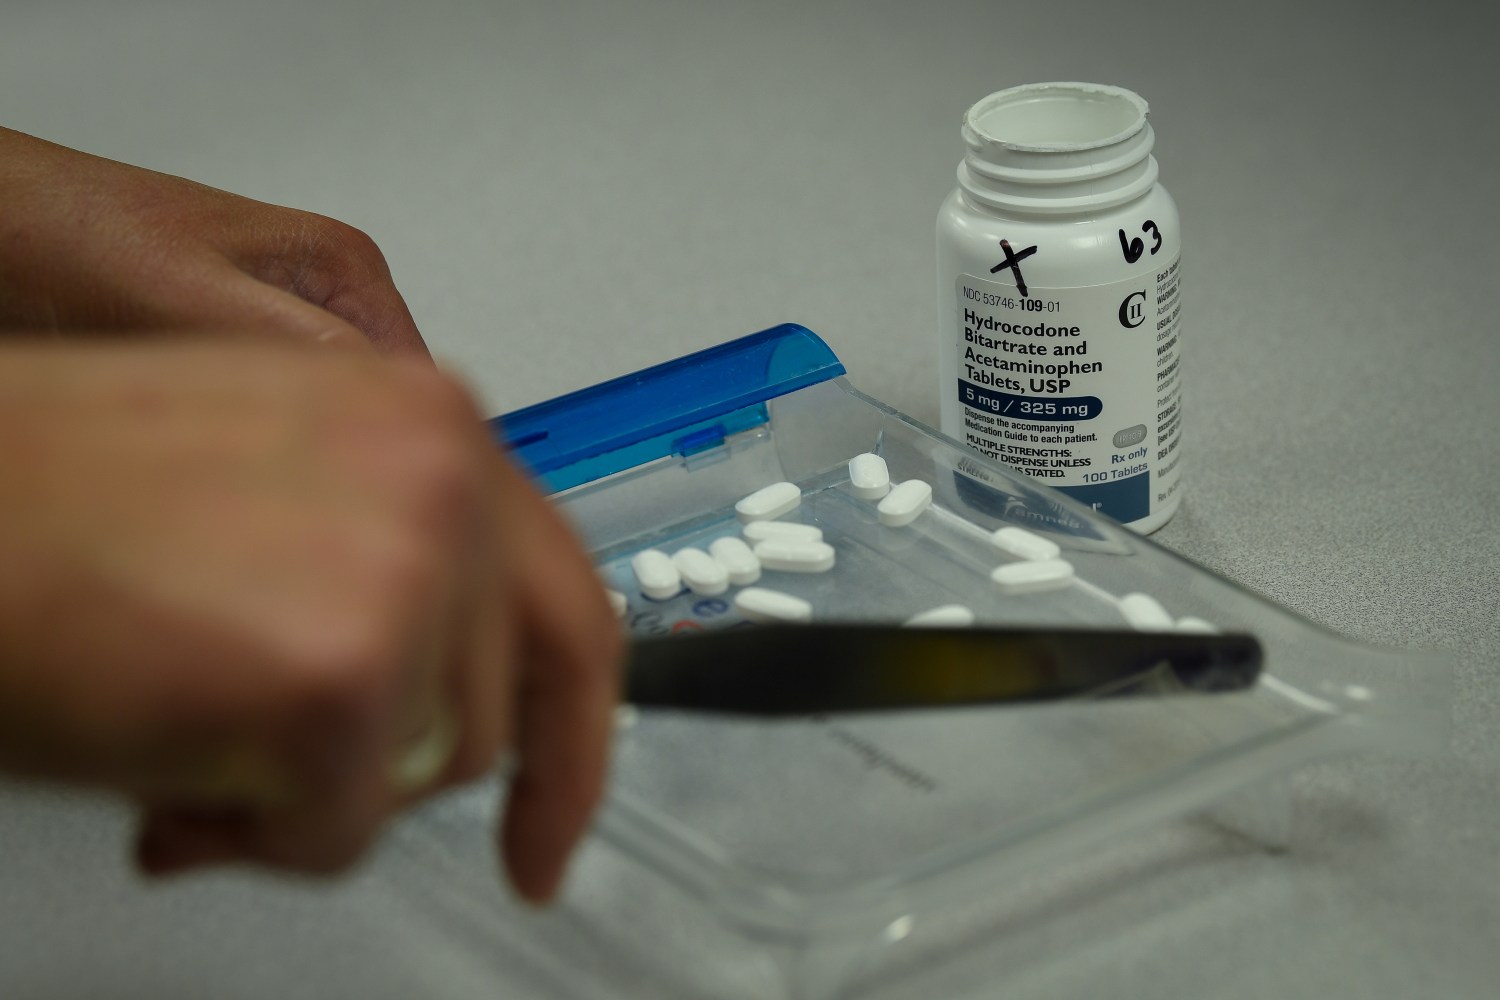 A pharmacist counts tablets of Hydrocodone at a pharmacy.